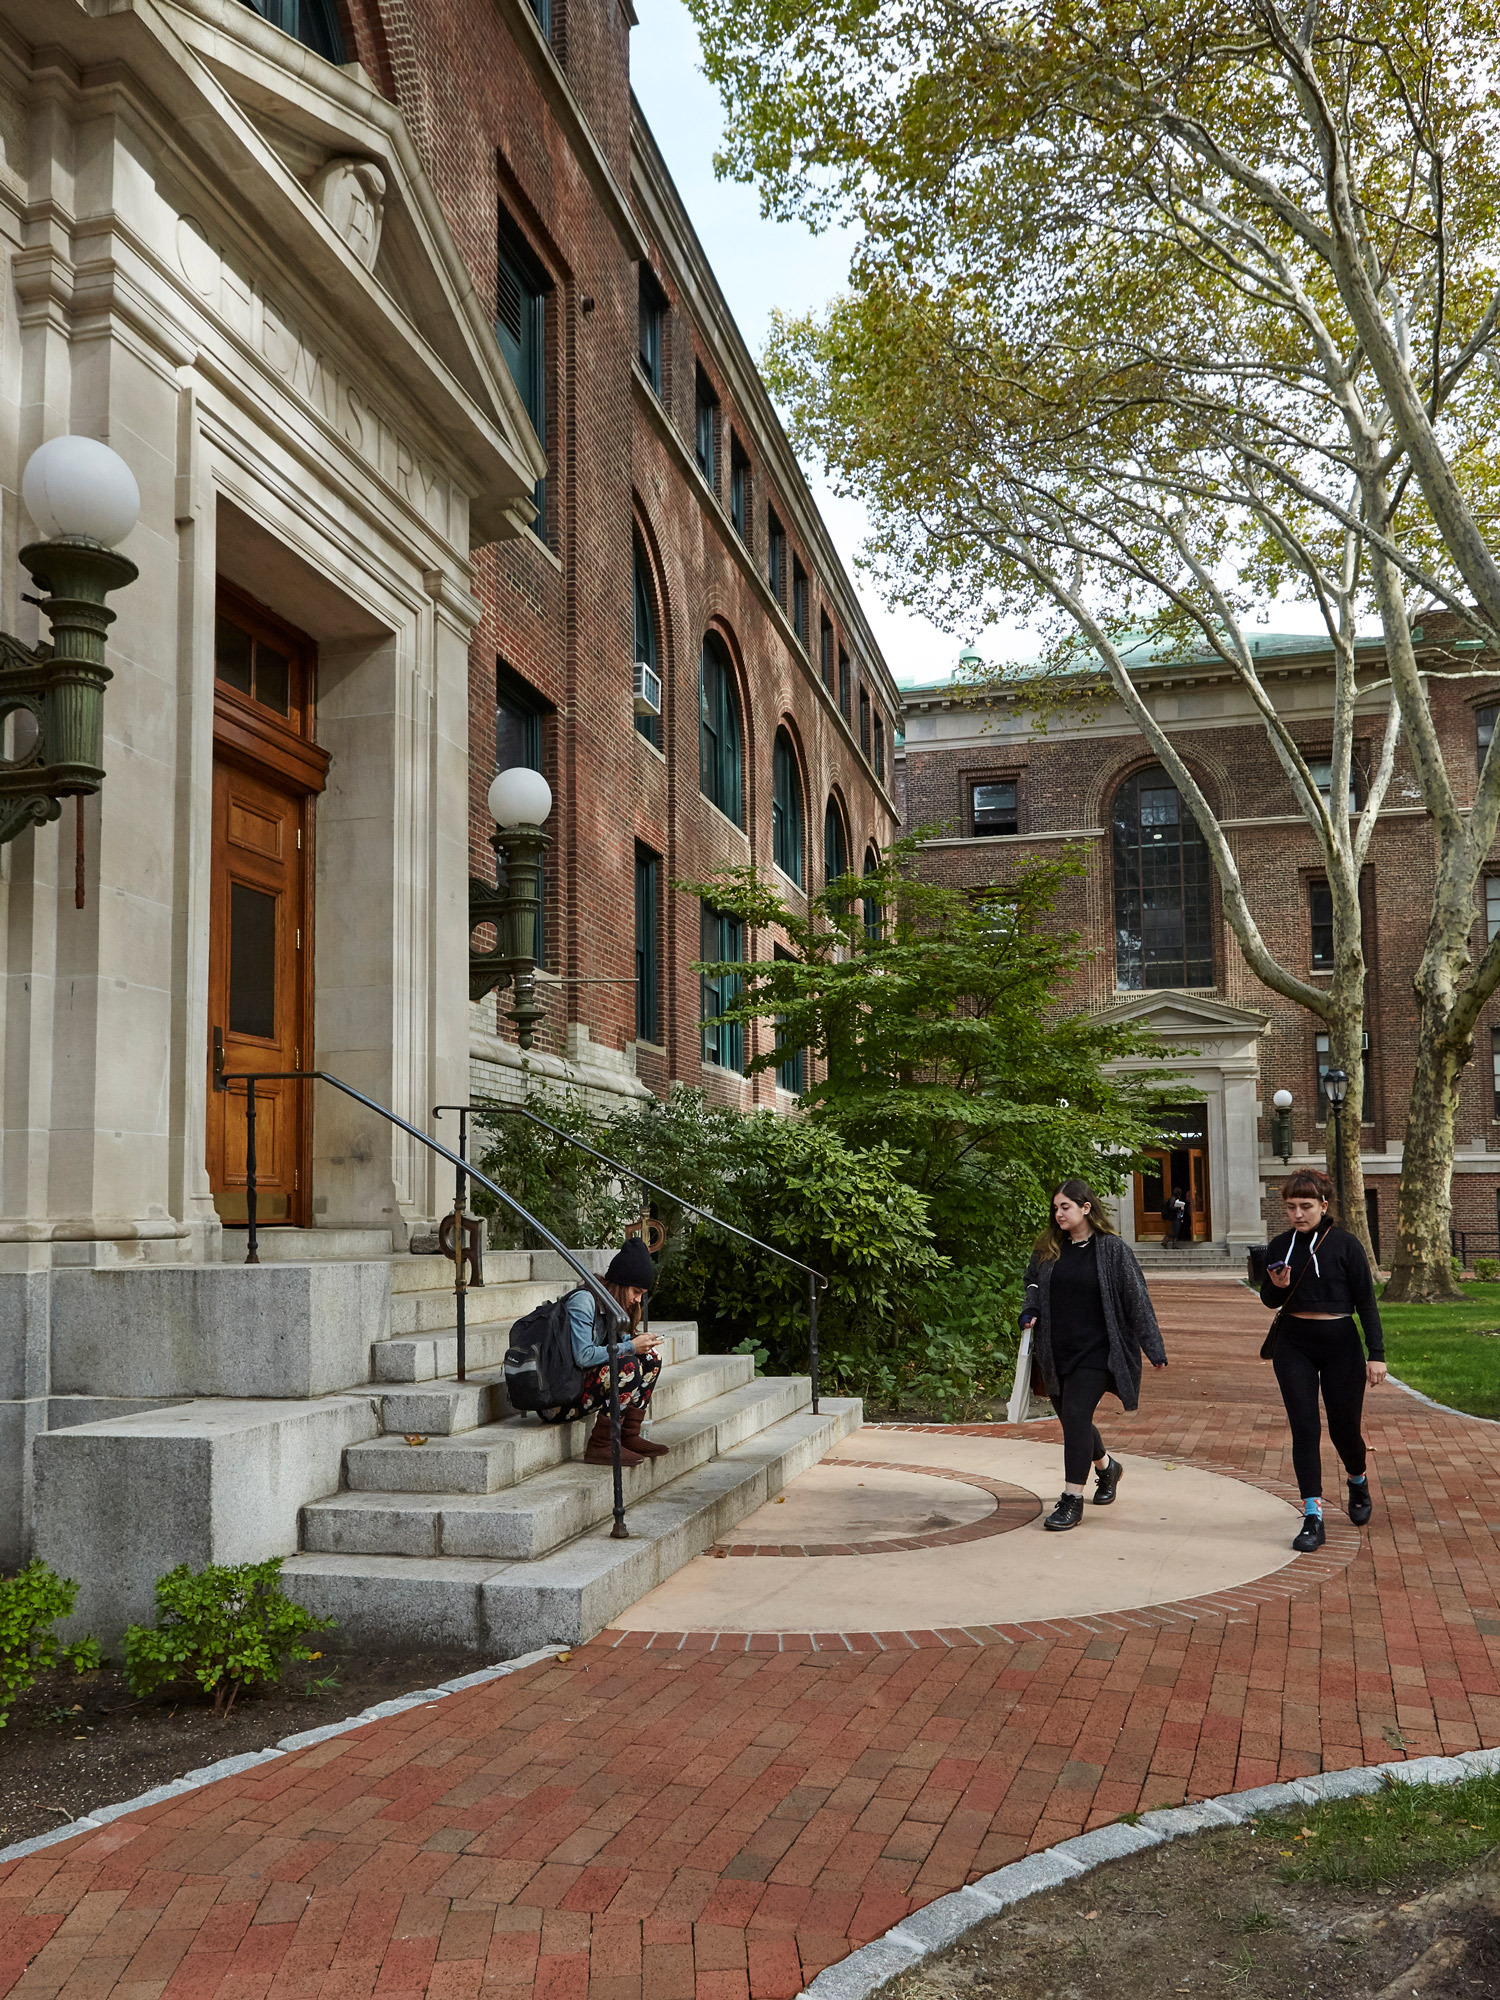 Elegant collegiate architecture with a red brick facade, grand white-trimmed windows, and a stately entrance featuring a wooden door flanked by vintage lanterns, set against a backdrop of verdant trees and a manicured lawn, with students traversing the serene campus setting.